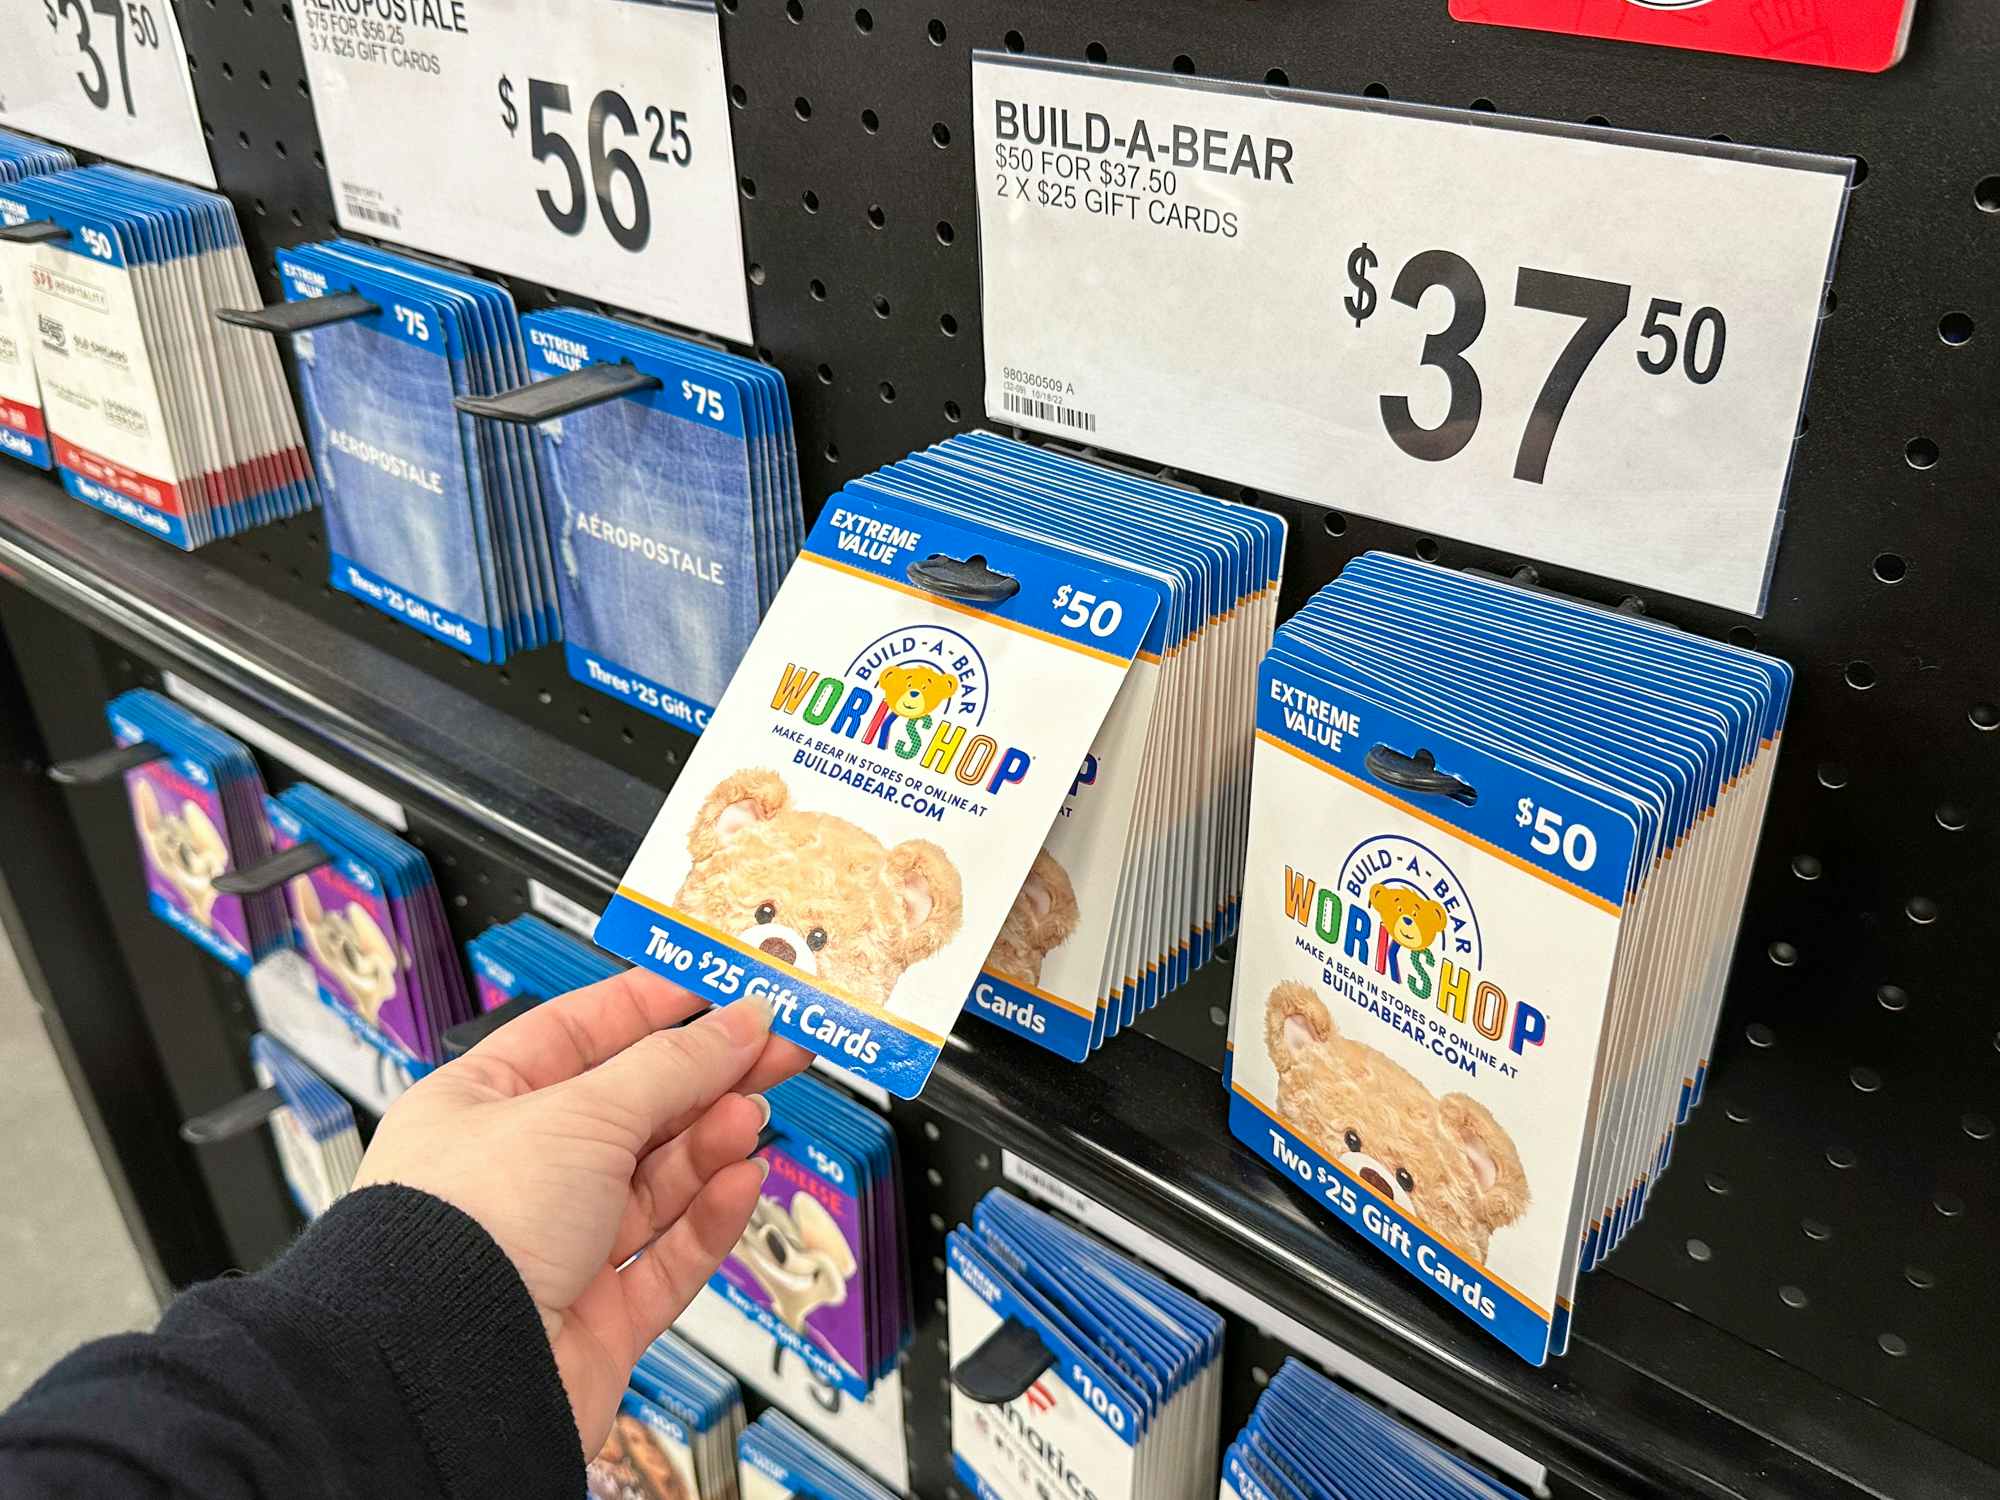 Someone taking a Build-a-Bear gift card from the Extreme Value gift card display in Sam's Club